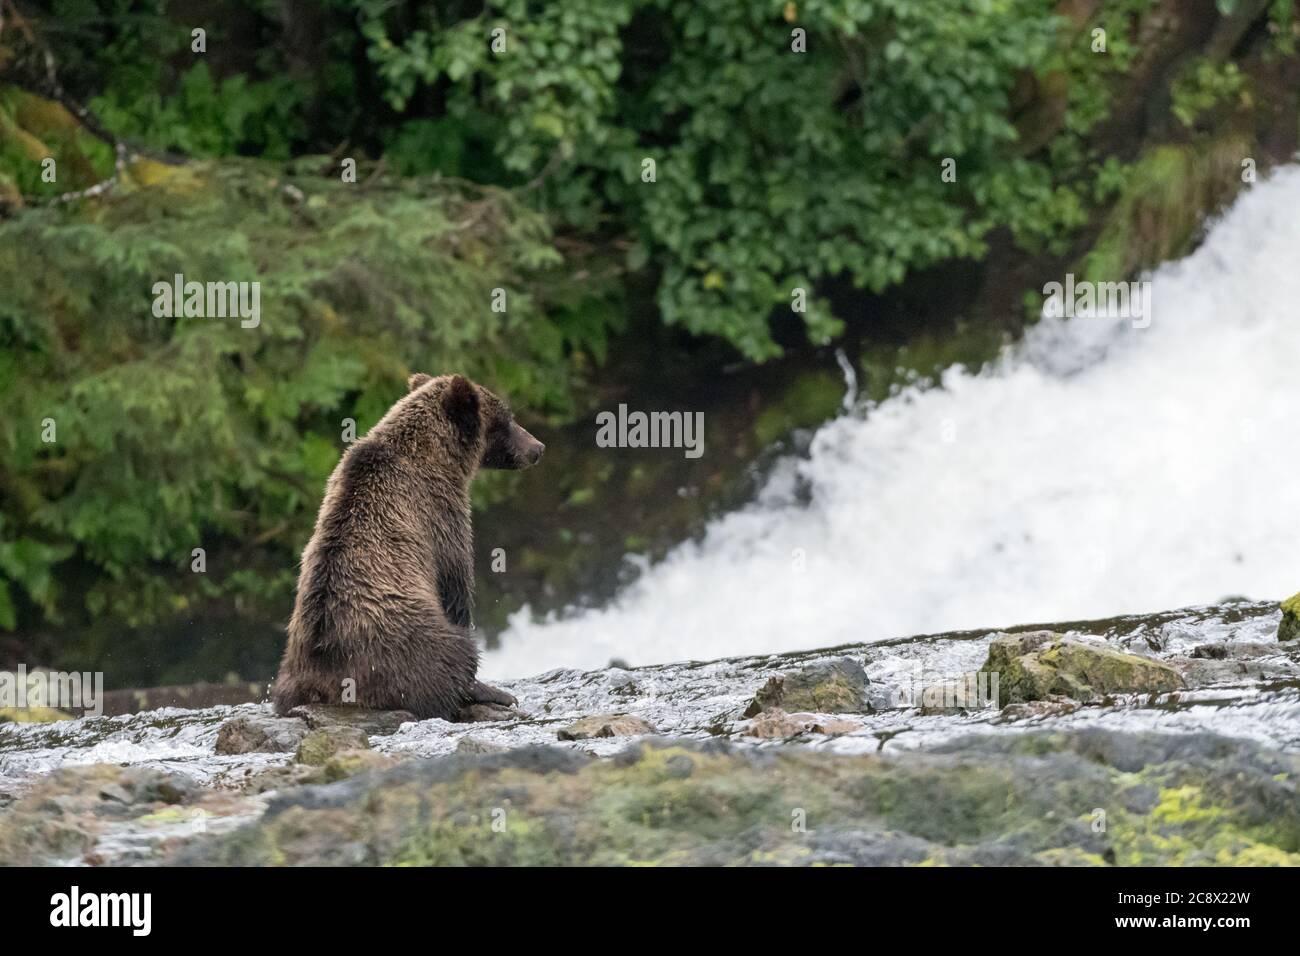 A grizzly bear (Ursus arctos horribilis) sitting in front of a waterfall in southeast Alaska, USA. Stock Photo